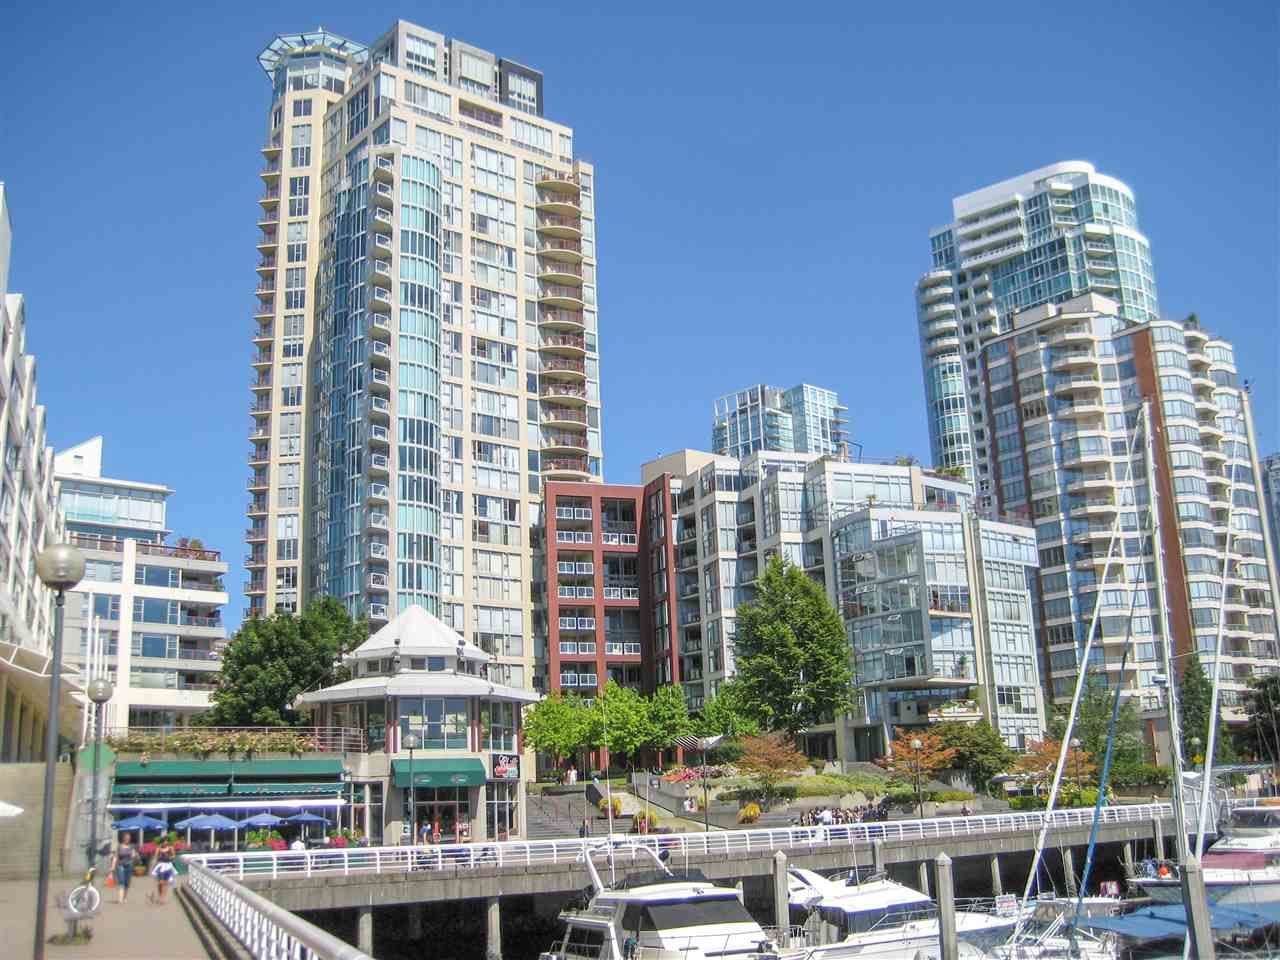 Main Photo: 2101 1000 BEACH AVENUE in Vancouver: Yaletown Condo for sale (Vancouver West)  : MLS®# R2248536